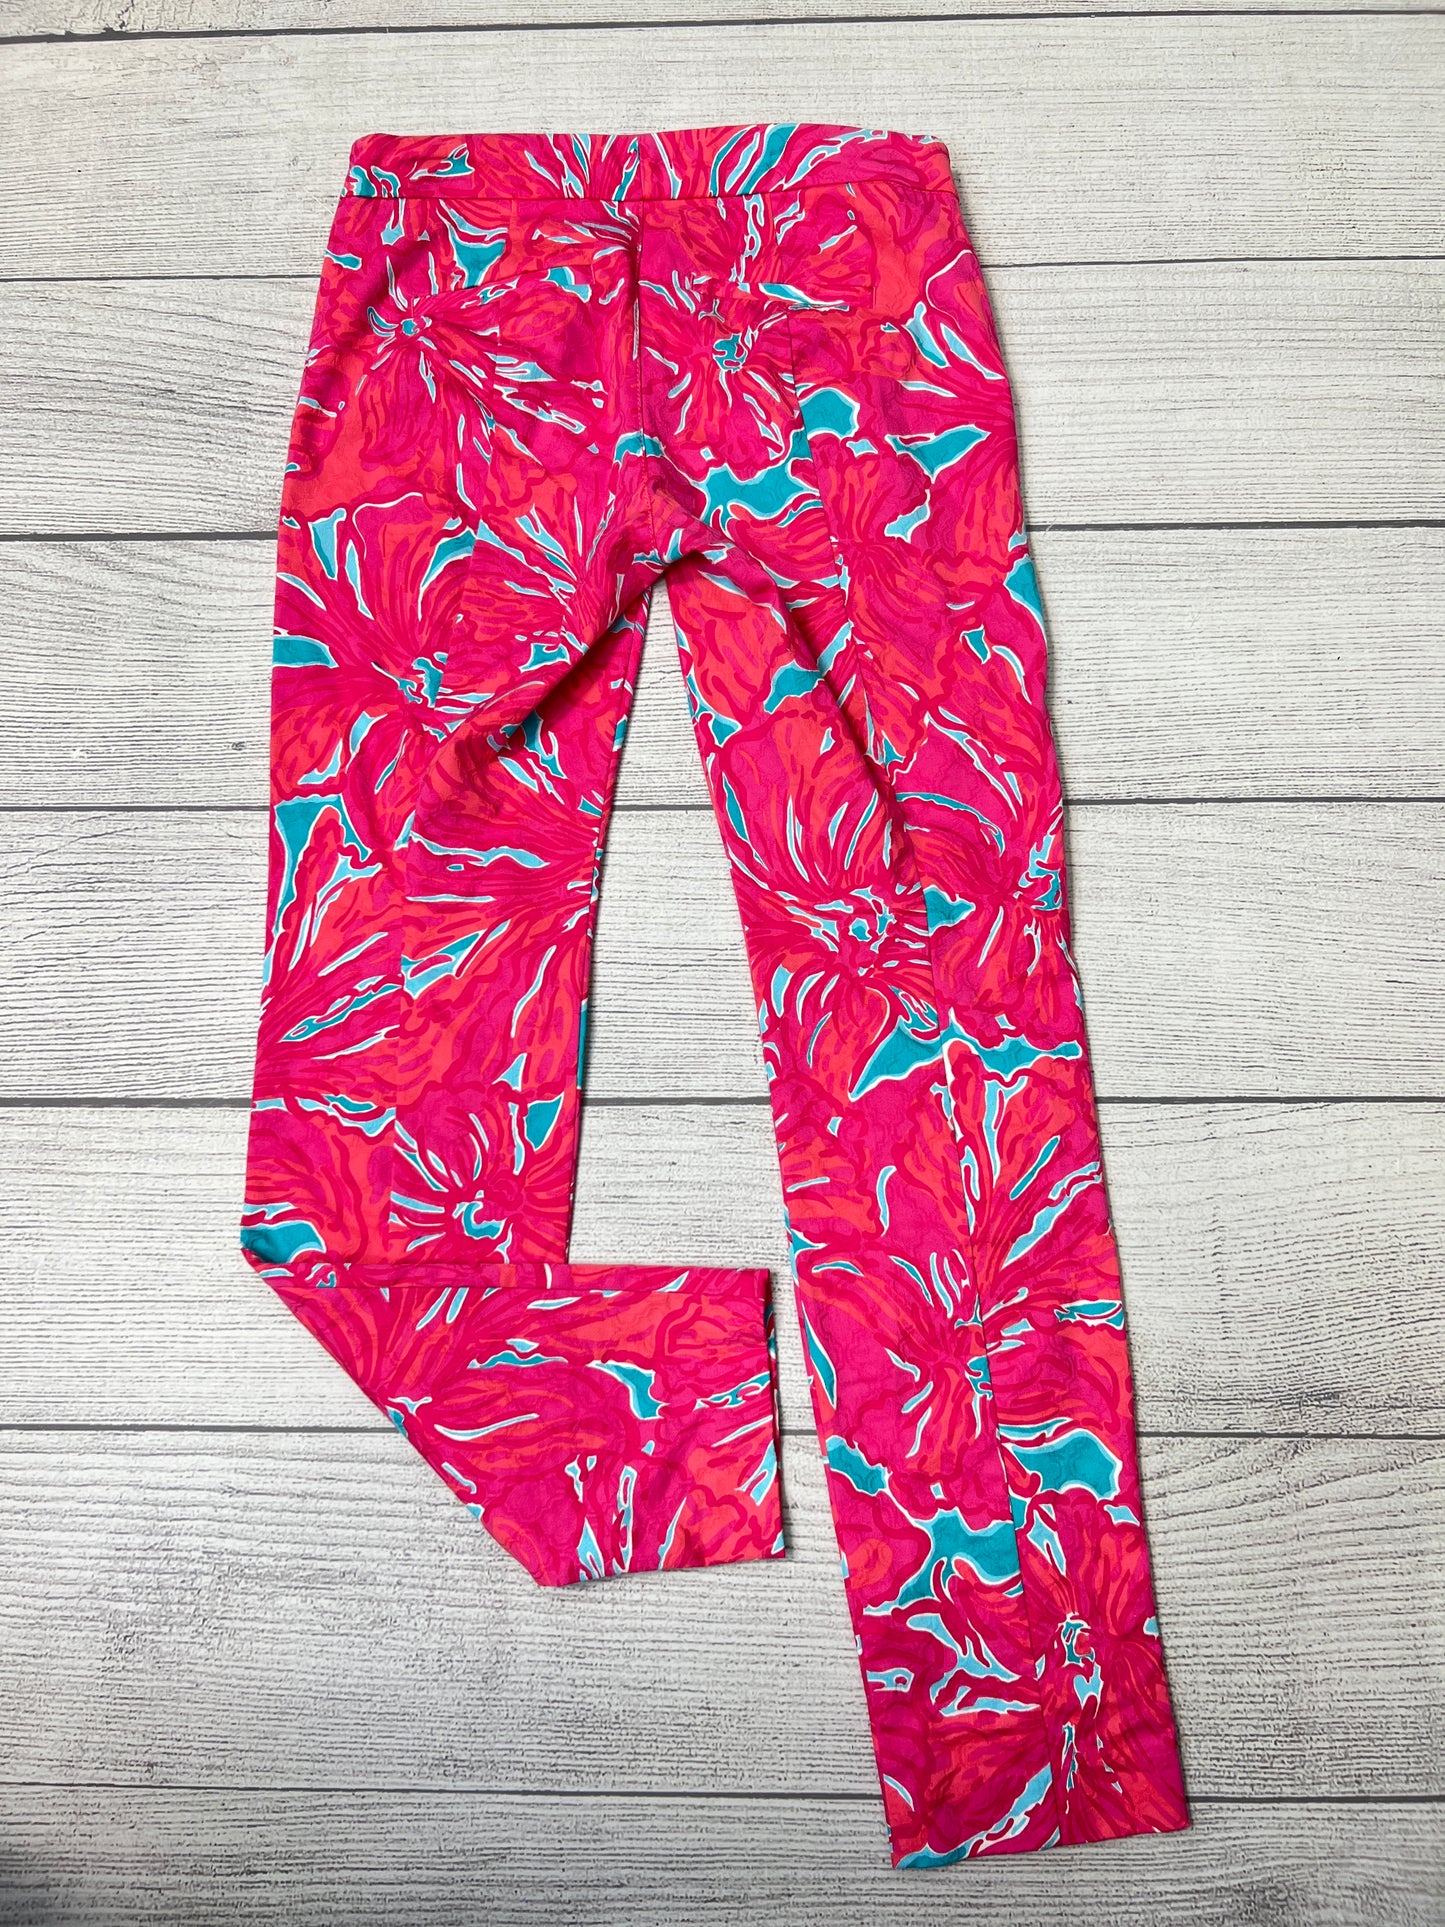 Pink Pants Ankle Lilly Pulitzer, Size 0